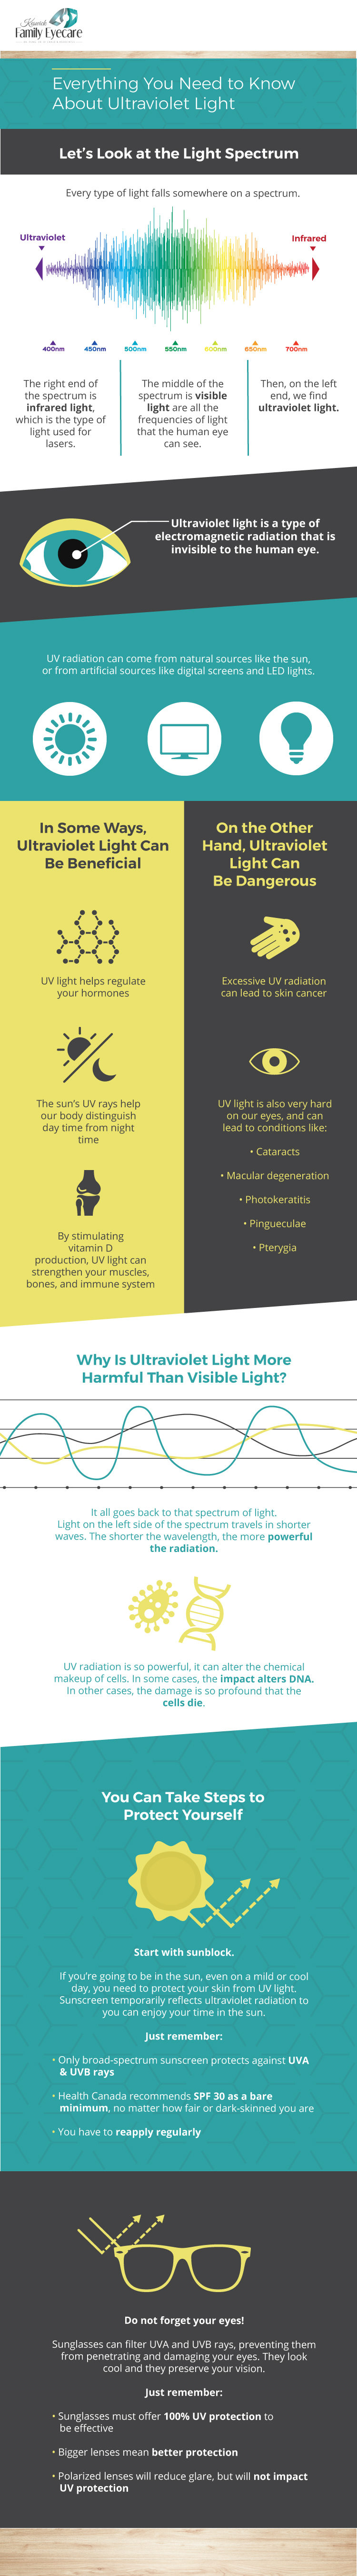 What is UV radiation and how does it affect health?